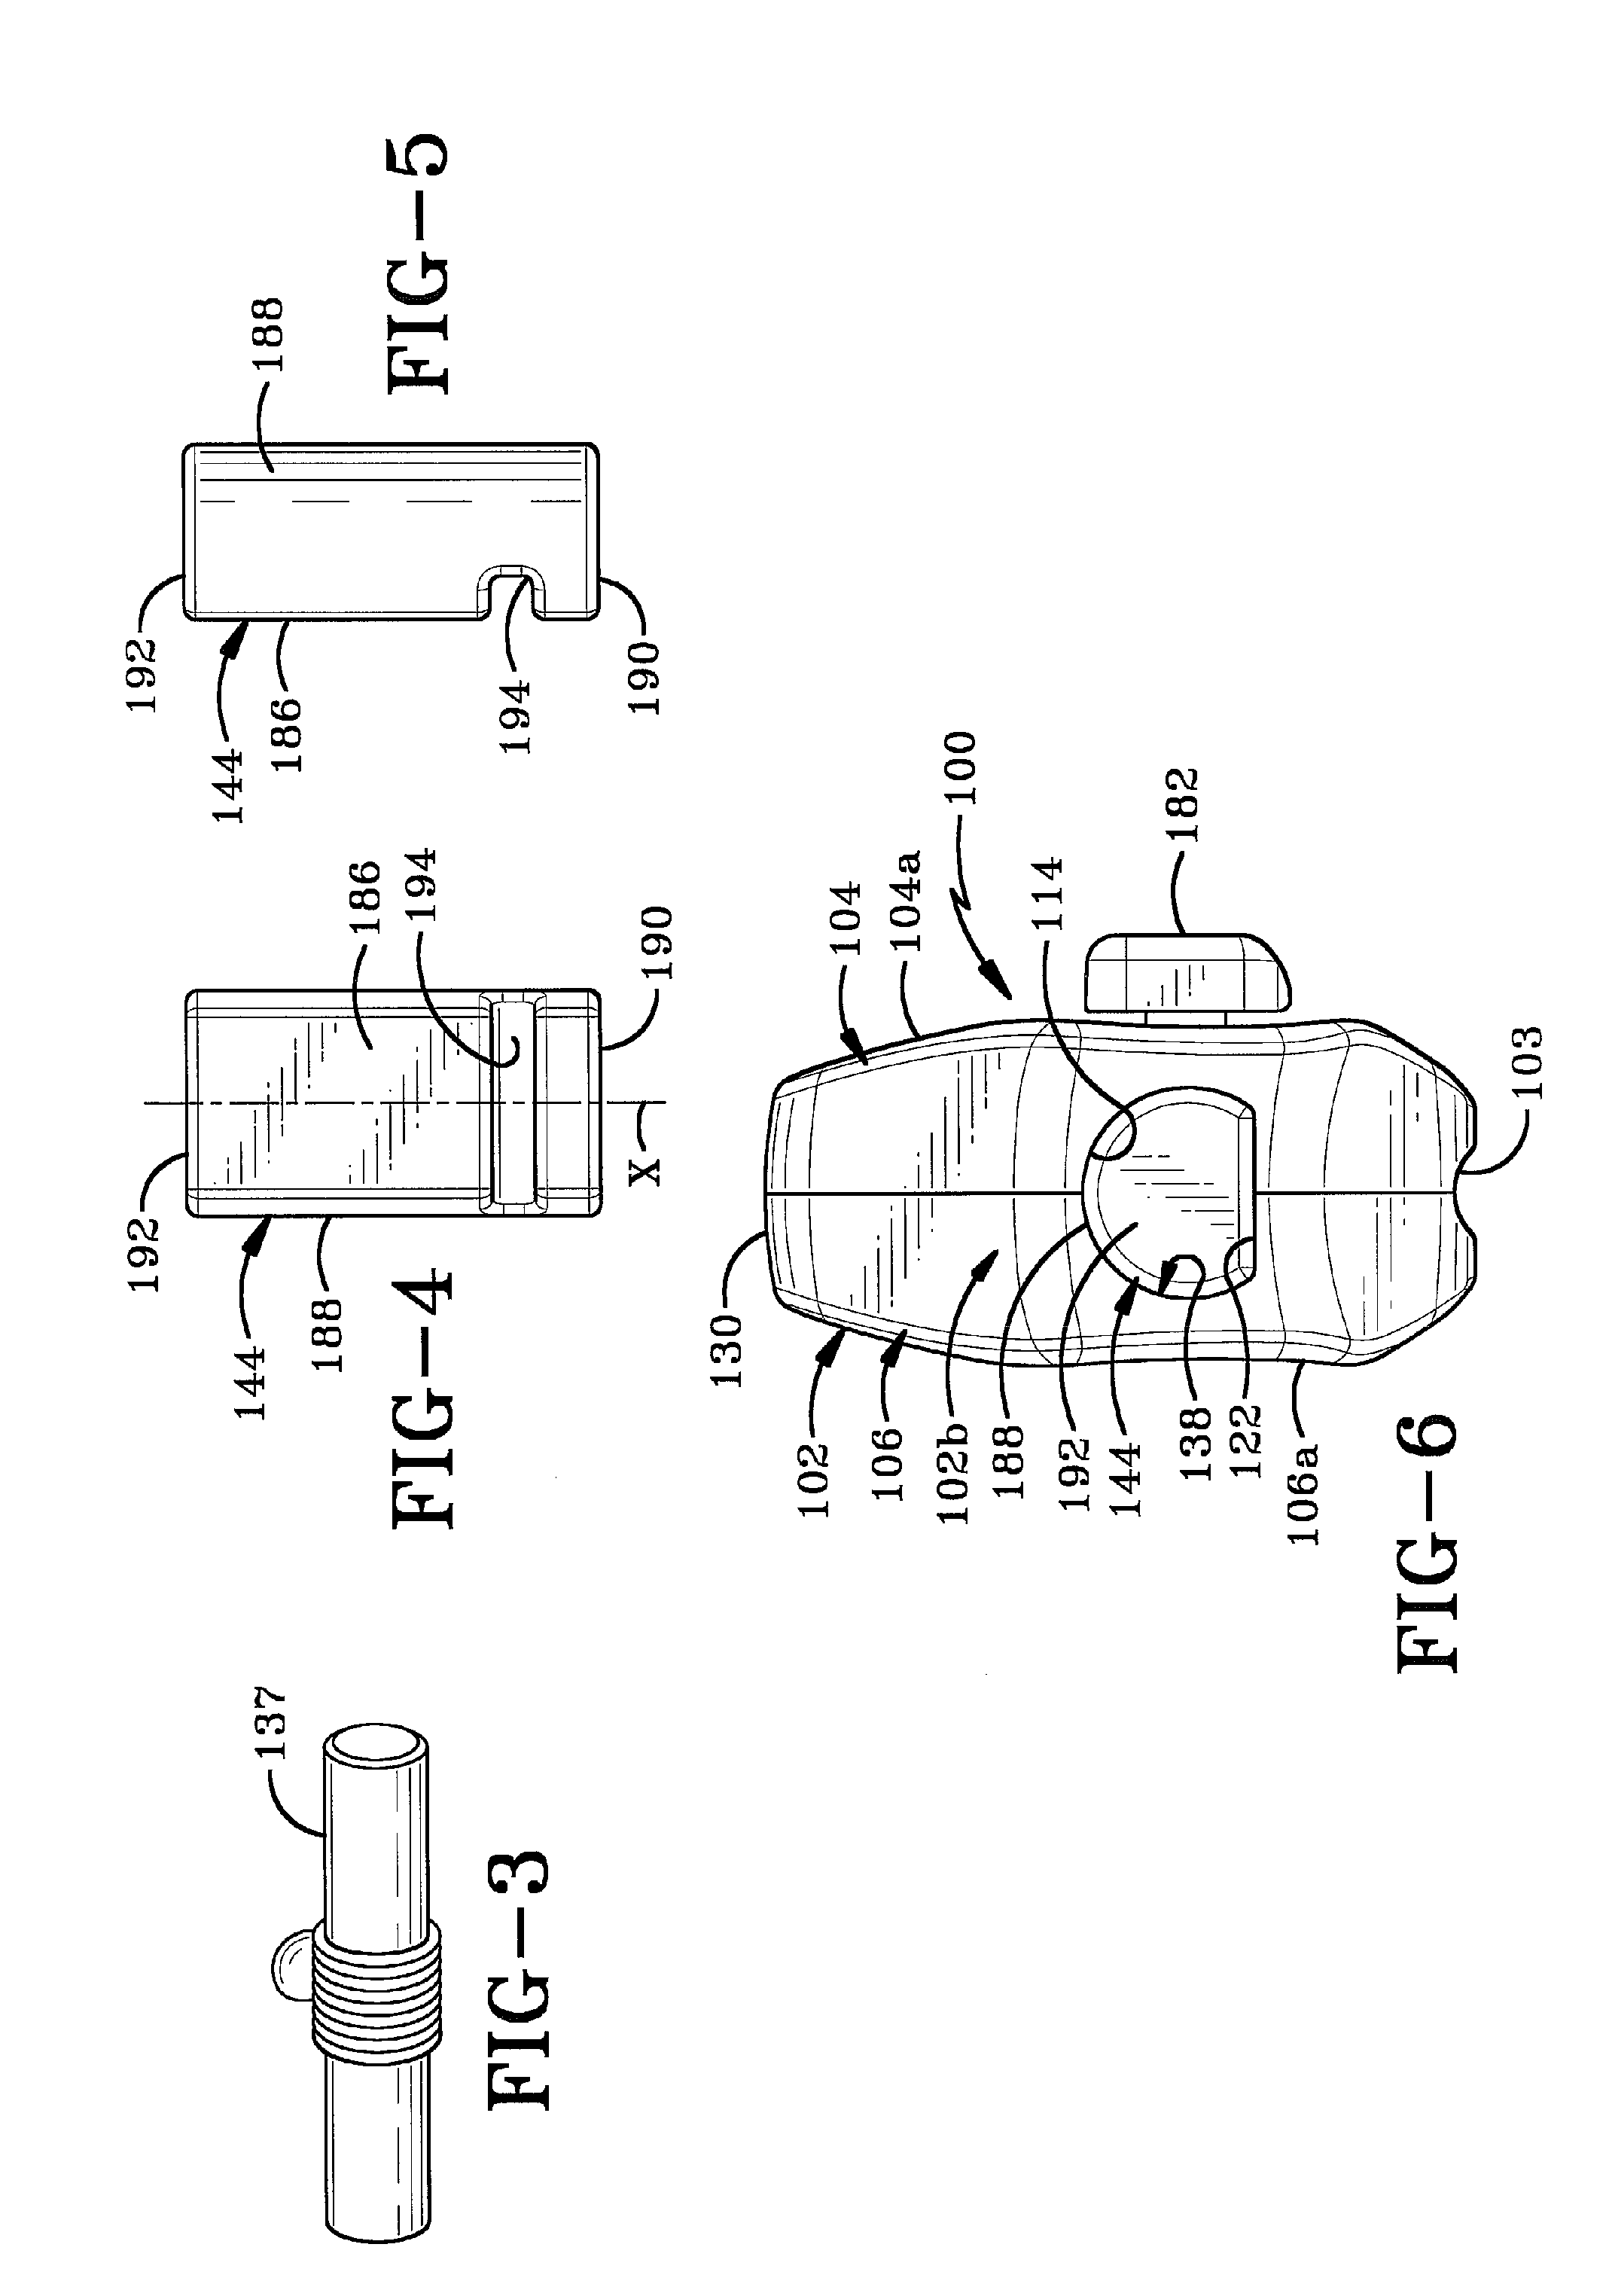 Magnetic key for use with a security device